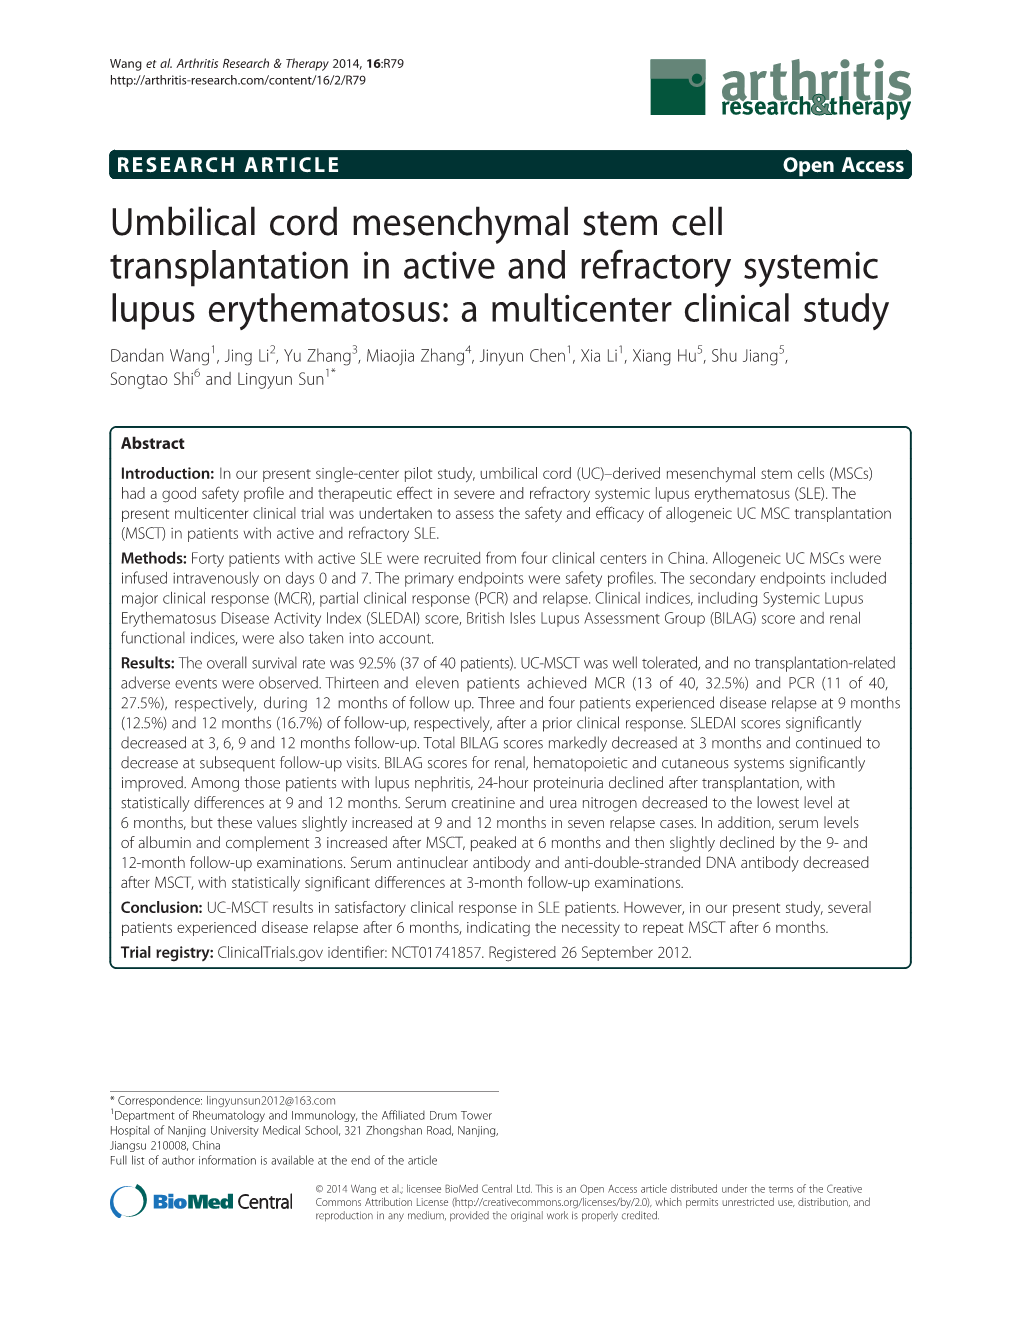 Umbilical Cord Mesenchymal Stem Cell Transplantation in Active And